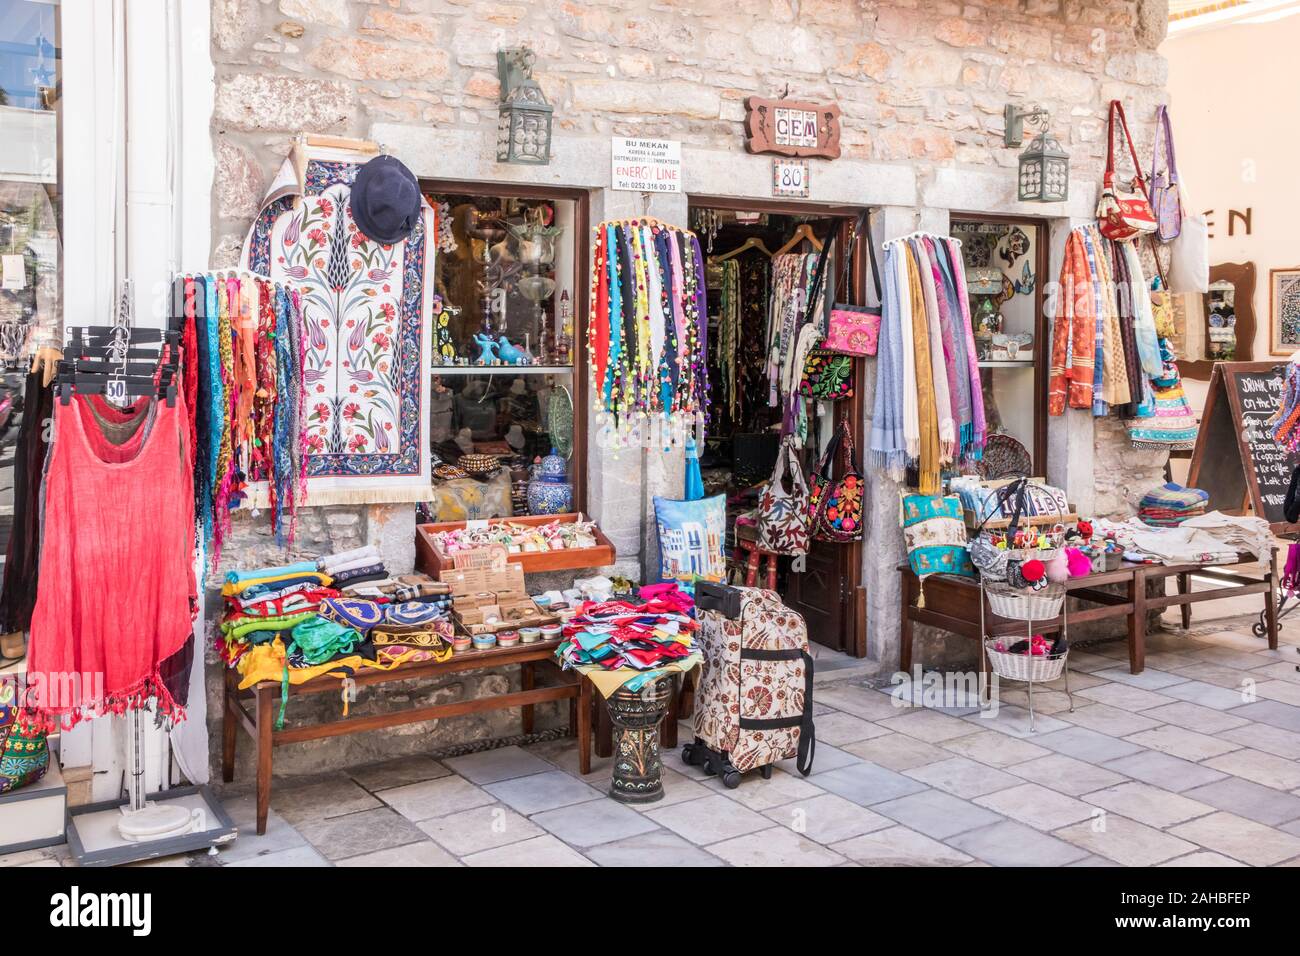 Bodrum, Turkey - September 22nd 2019: Souvenir and clothing shop in the tourist area. The town is a popular tourist destination. Stock Photo